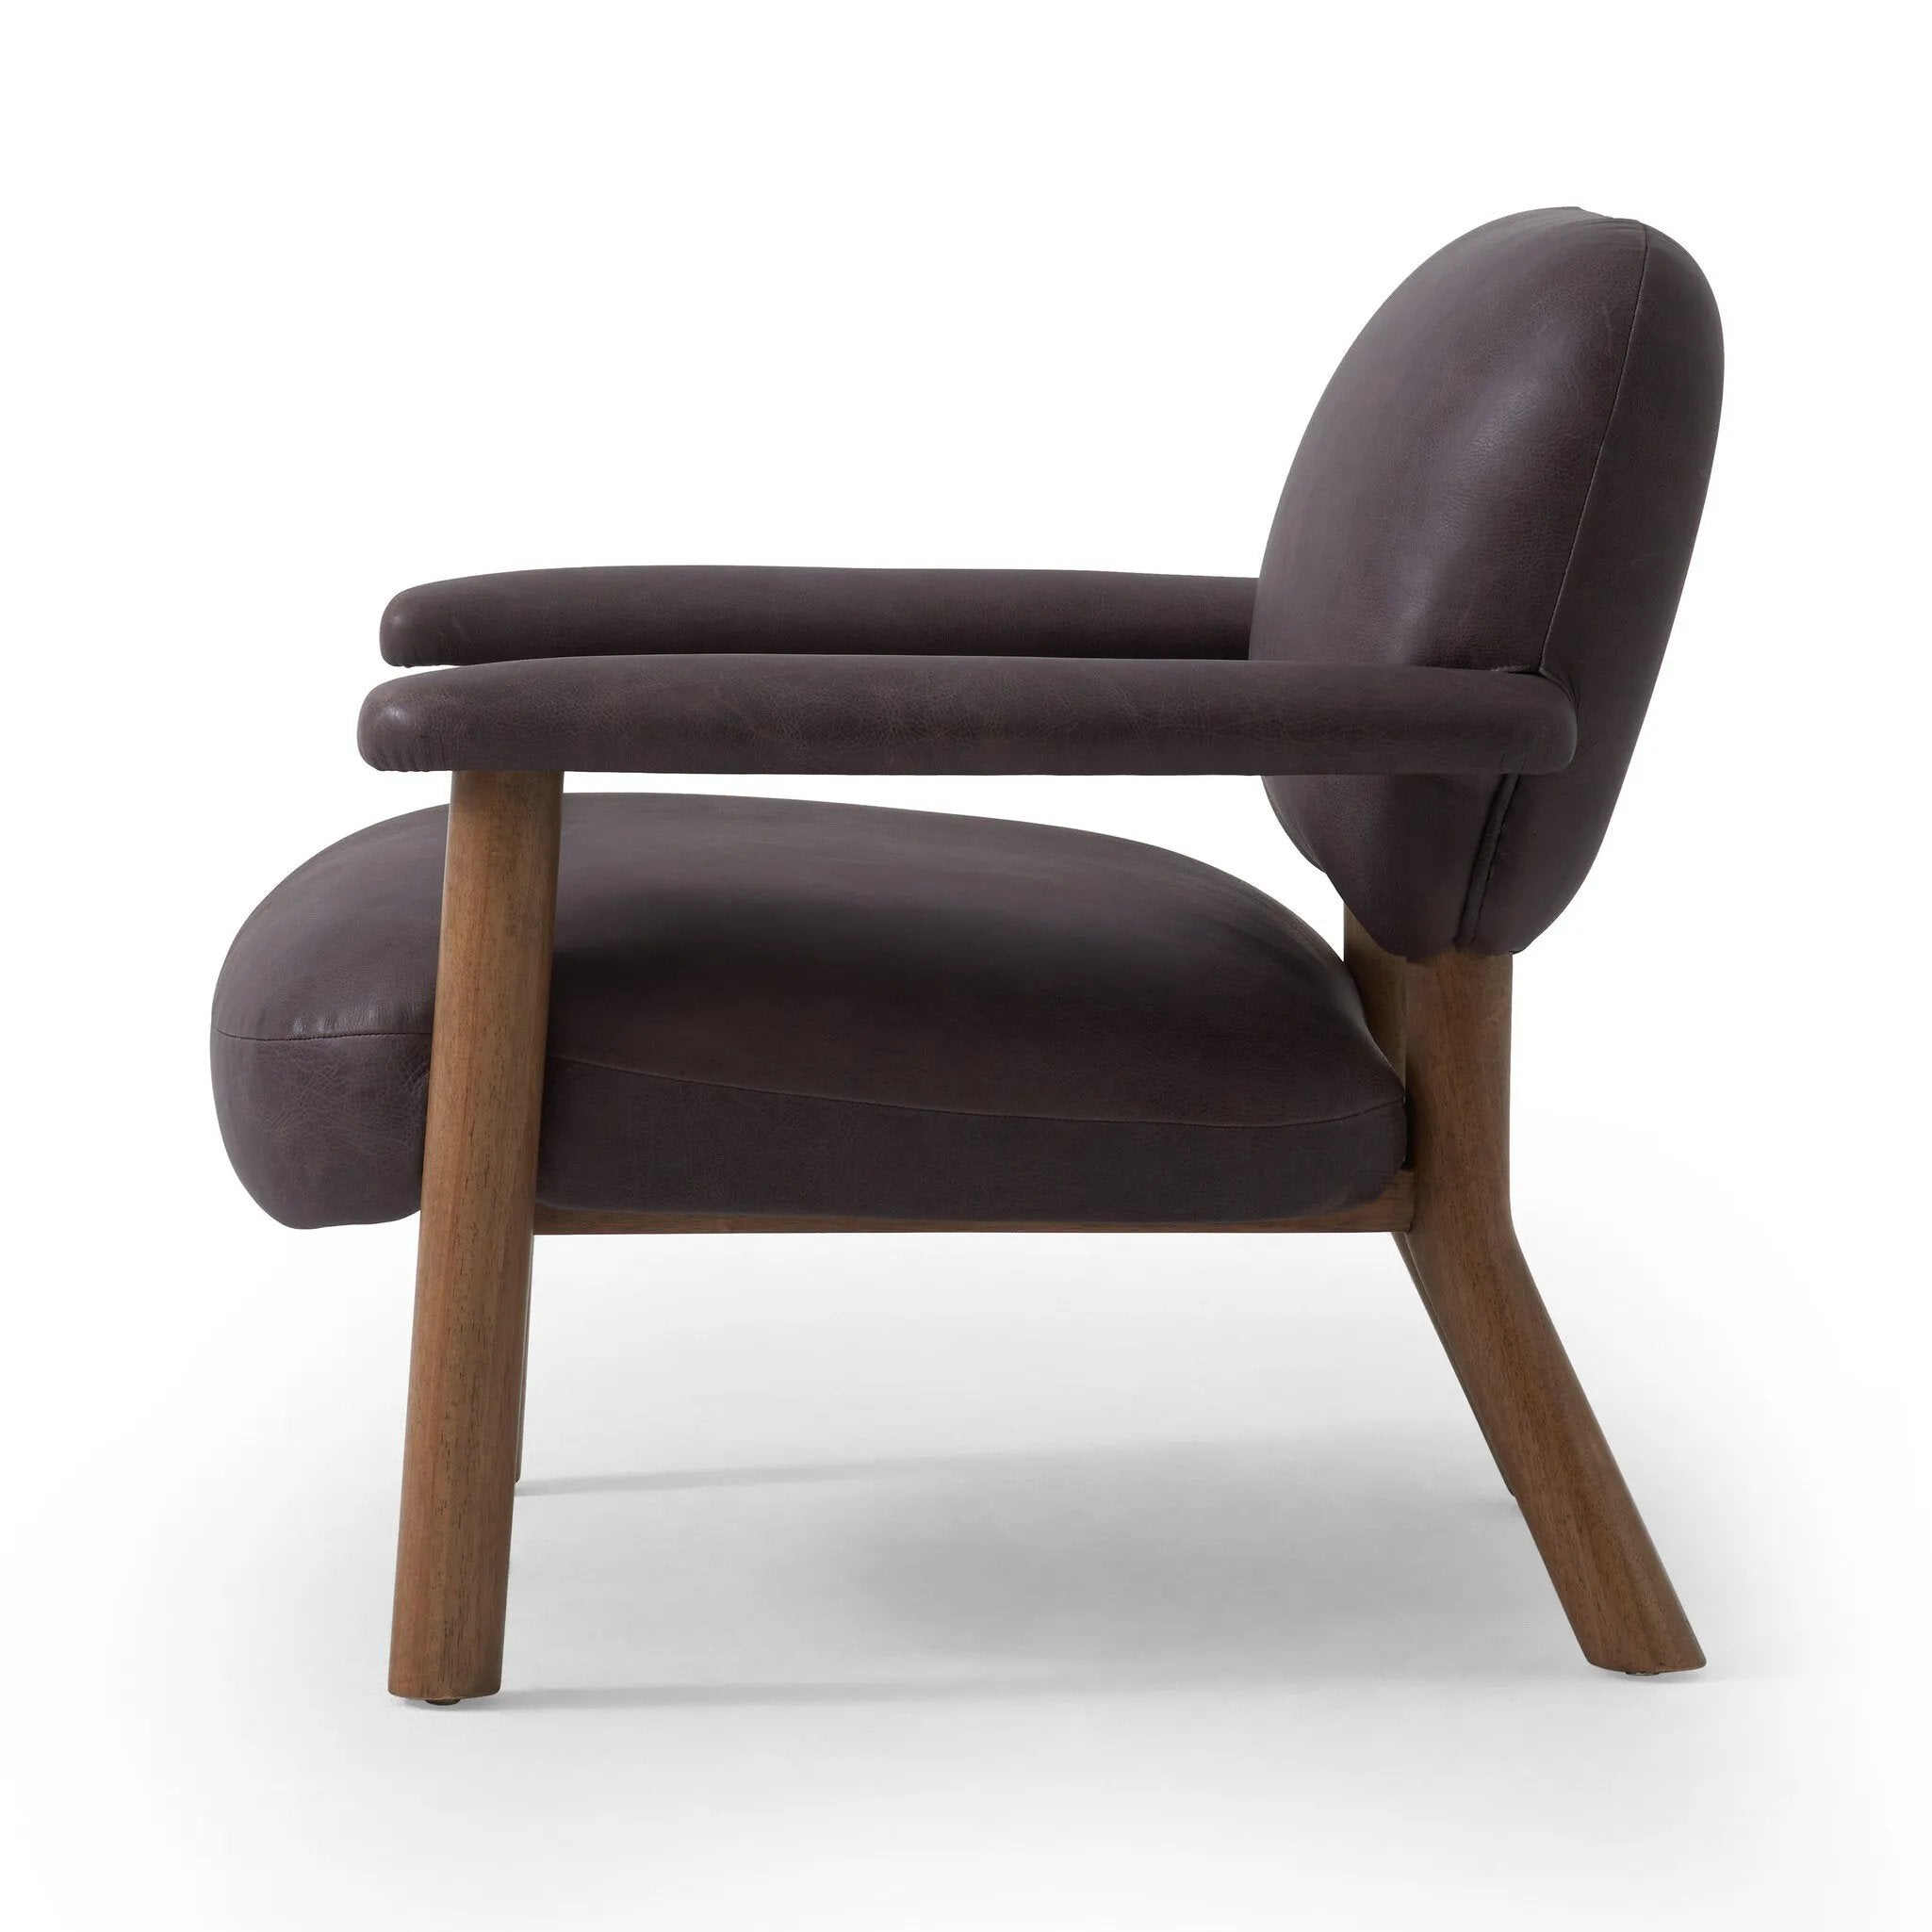 Sleek and inviting, this wood-meets-leather arm chair is timeless in any context. Large cylindrical legs support the upholstered back and seat, which are covered in bark-colored top-grain leather. Spring suspension adds comfort and durability to the seat cushion.Collection: Carnegi Amethyst Home provides interior design, new home construction design consulting, vintage area rugs, and lighting in the Alpharetta metro area.